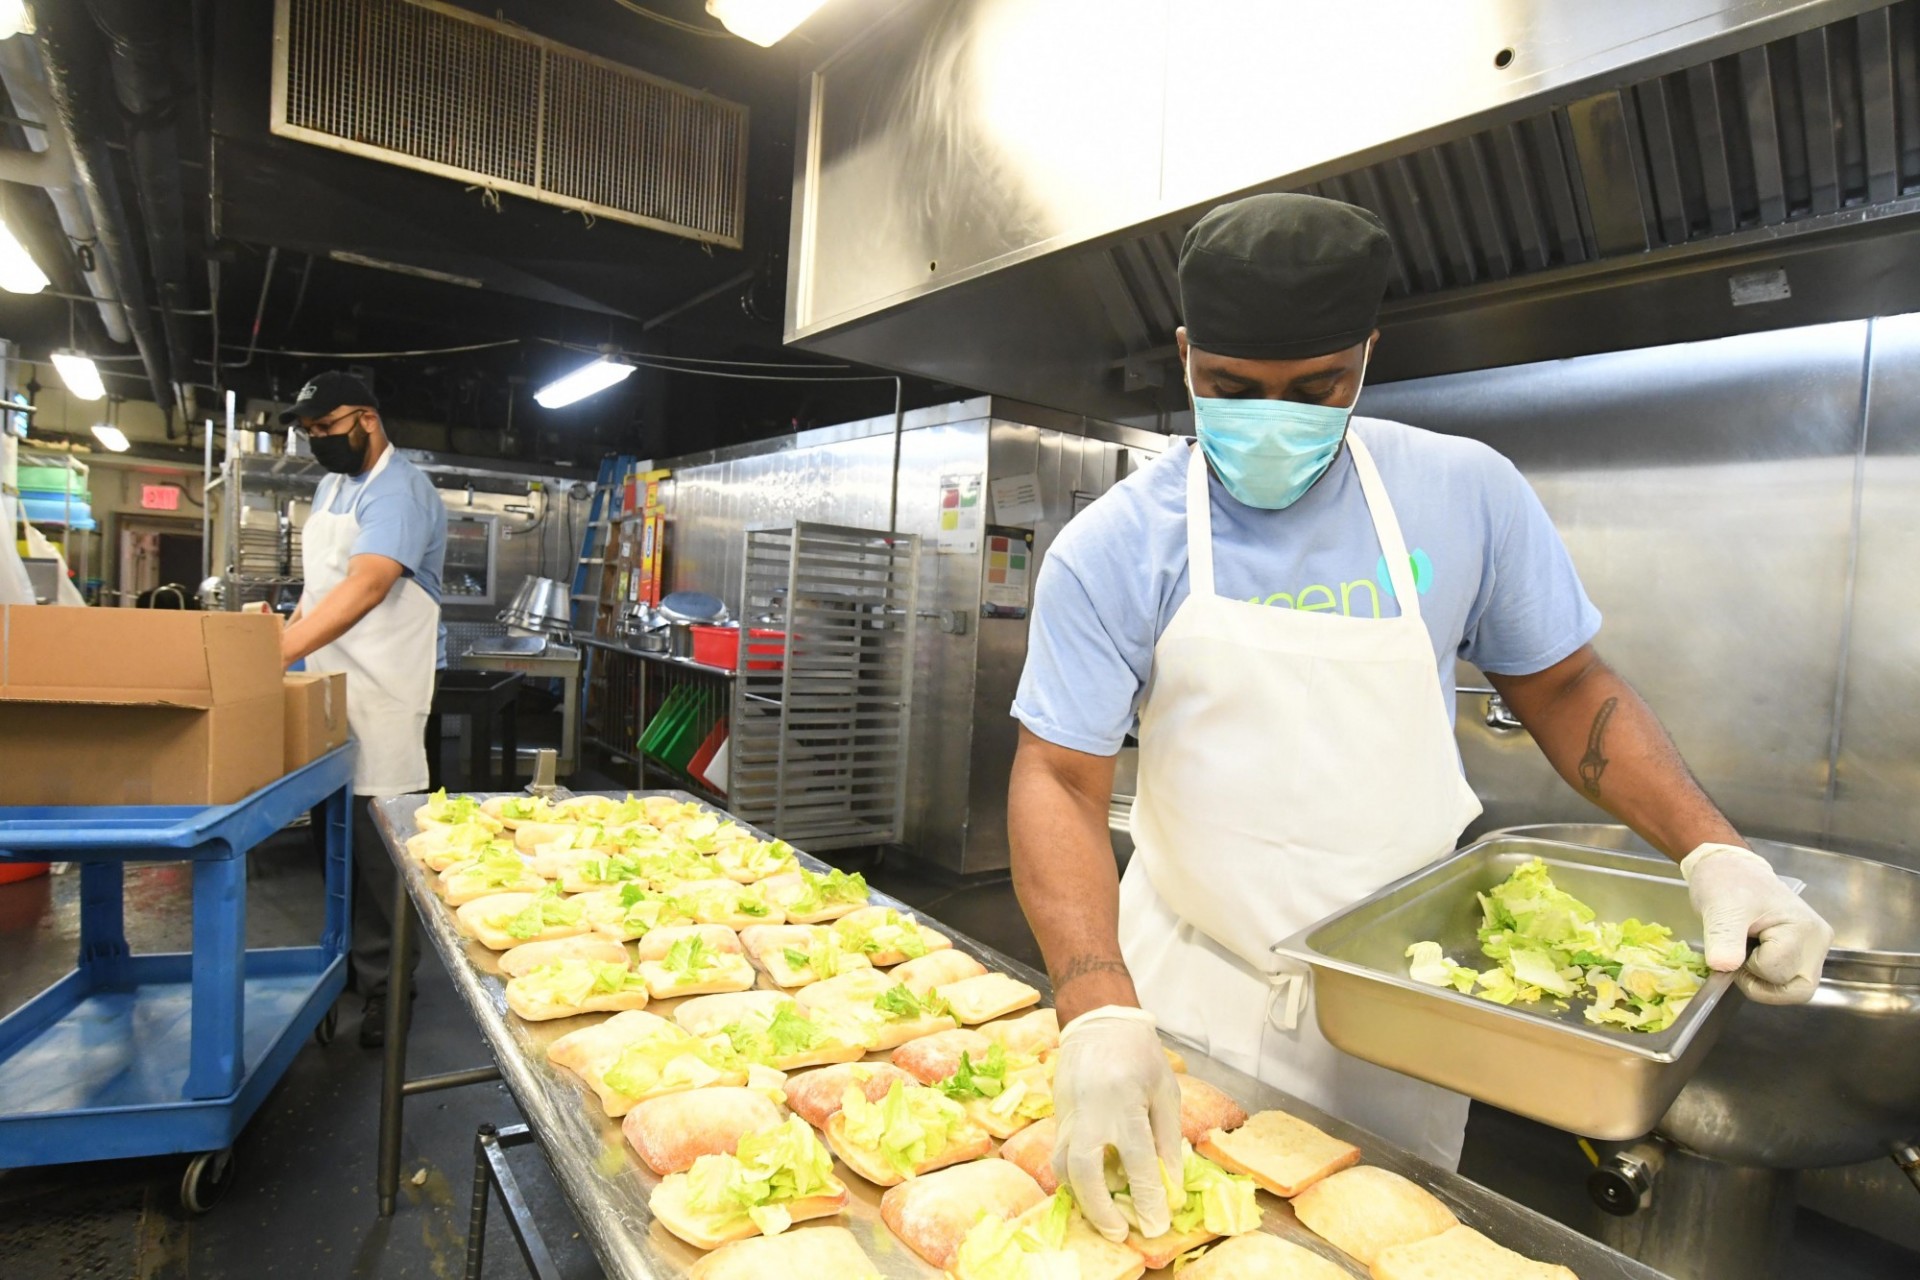 Dining staff member adds lettuce to sandwiches being prepared in John Jay Dining Hall